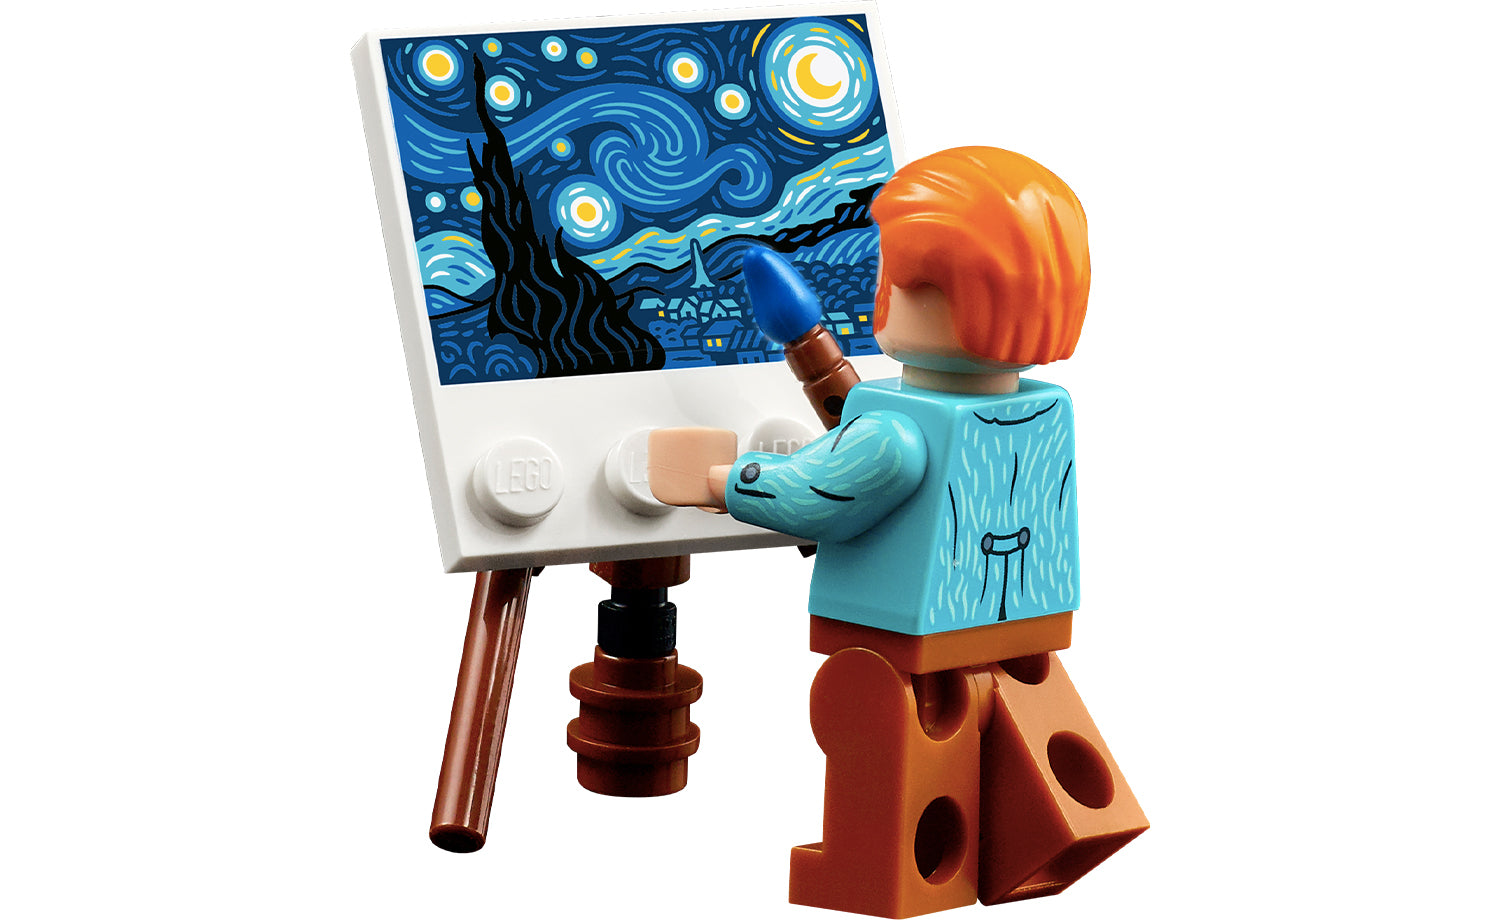 LEGO 21333 Vincent van Gogh - The Starry Night - IDEAS from Tates Toyworld  5702017189840